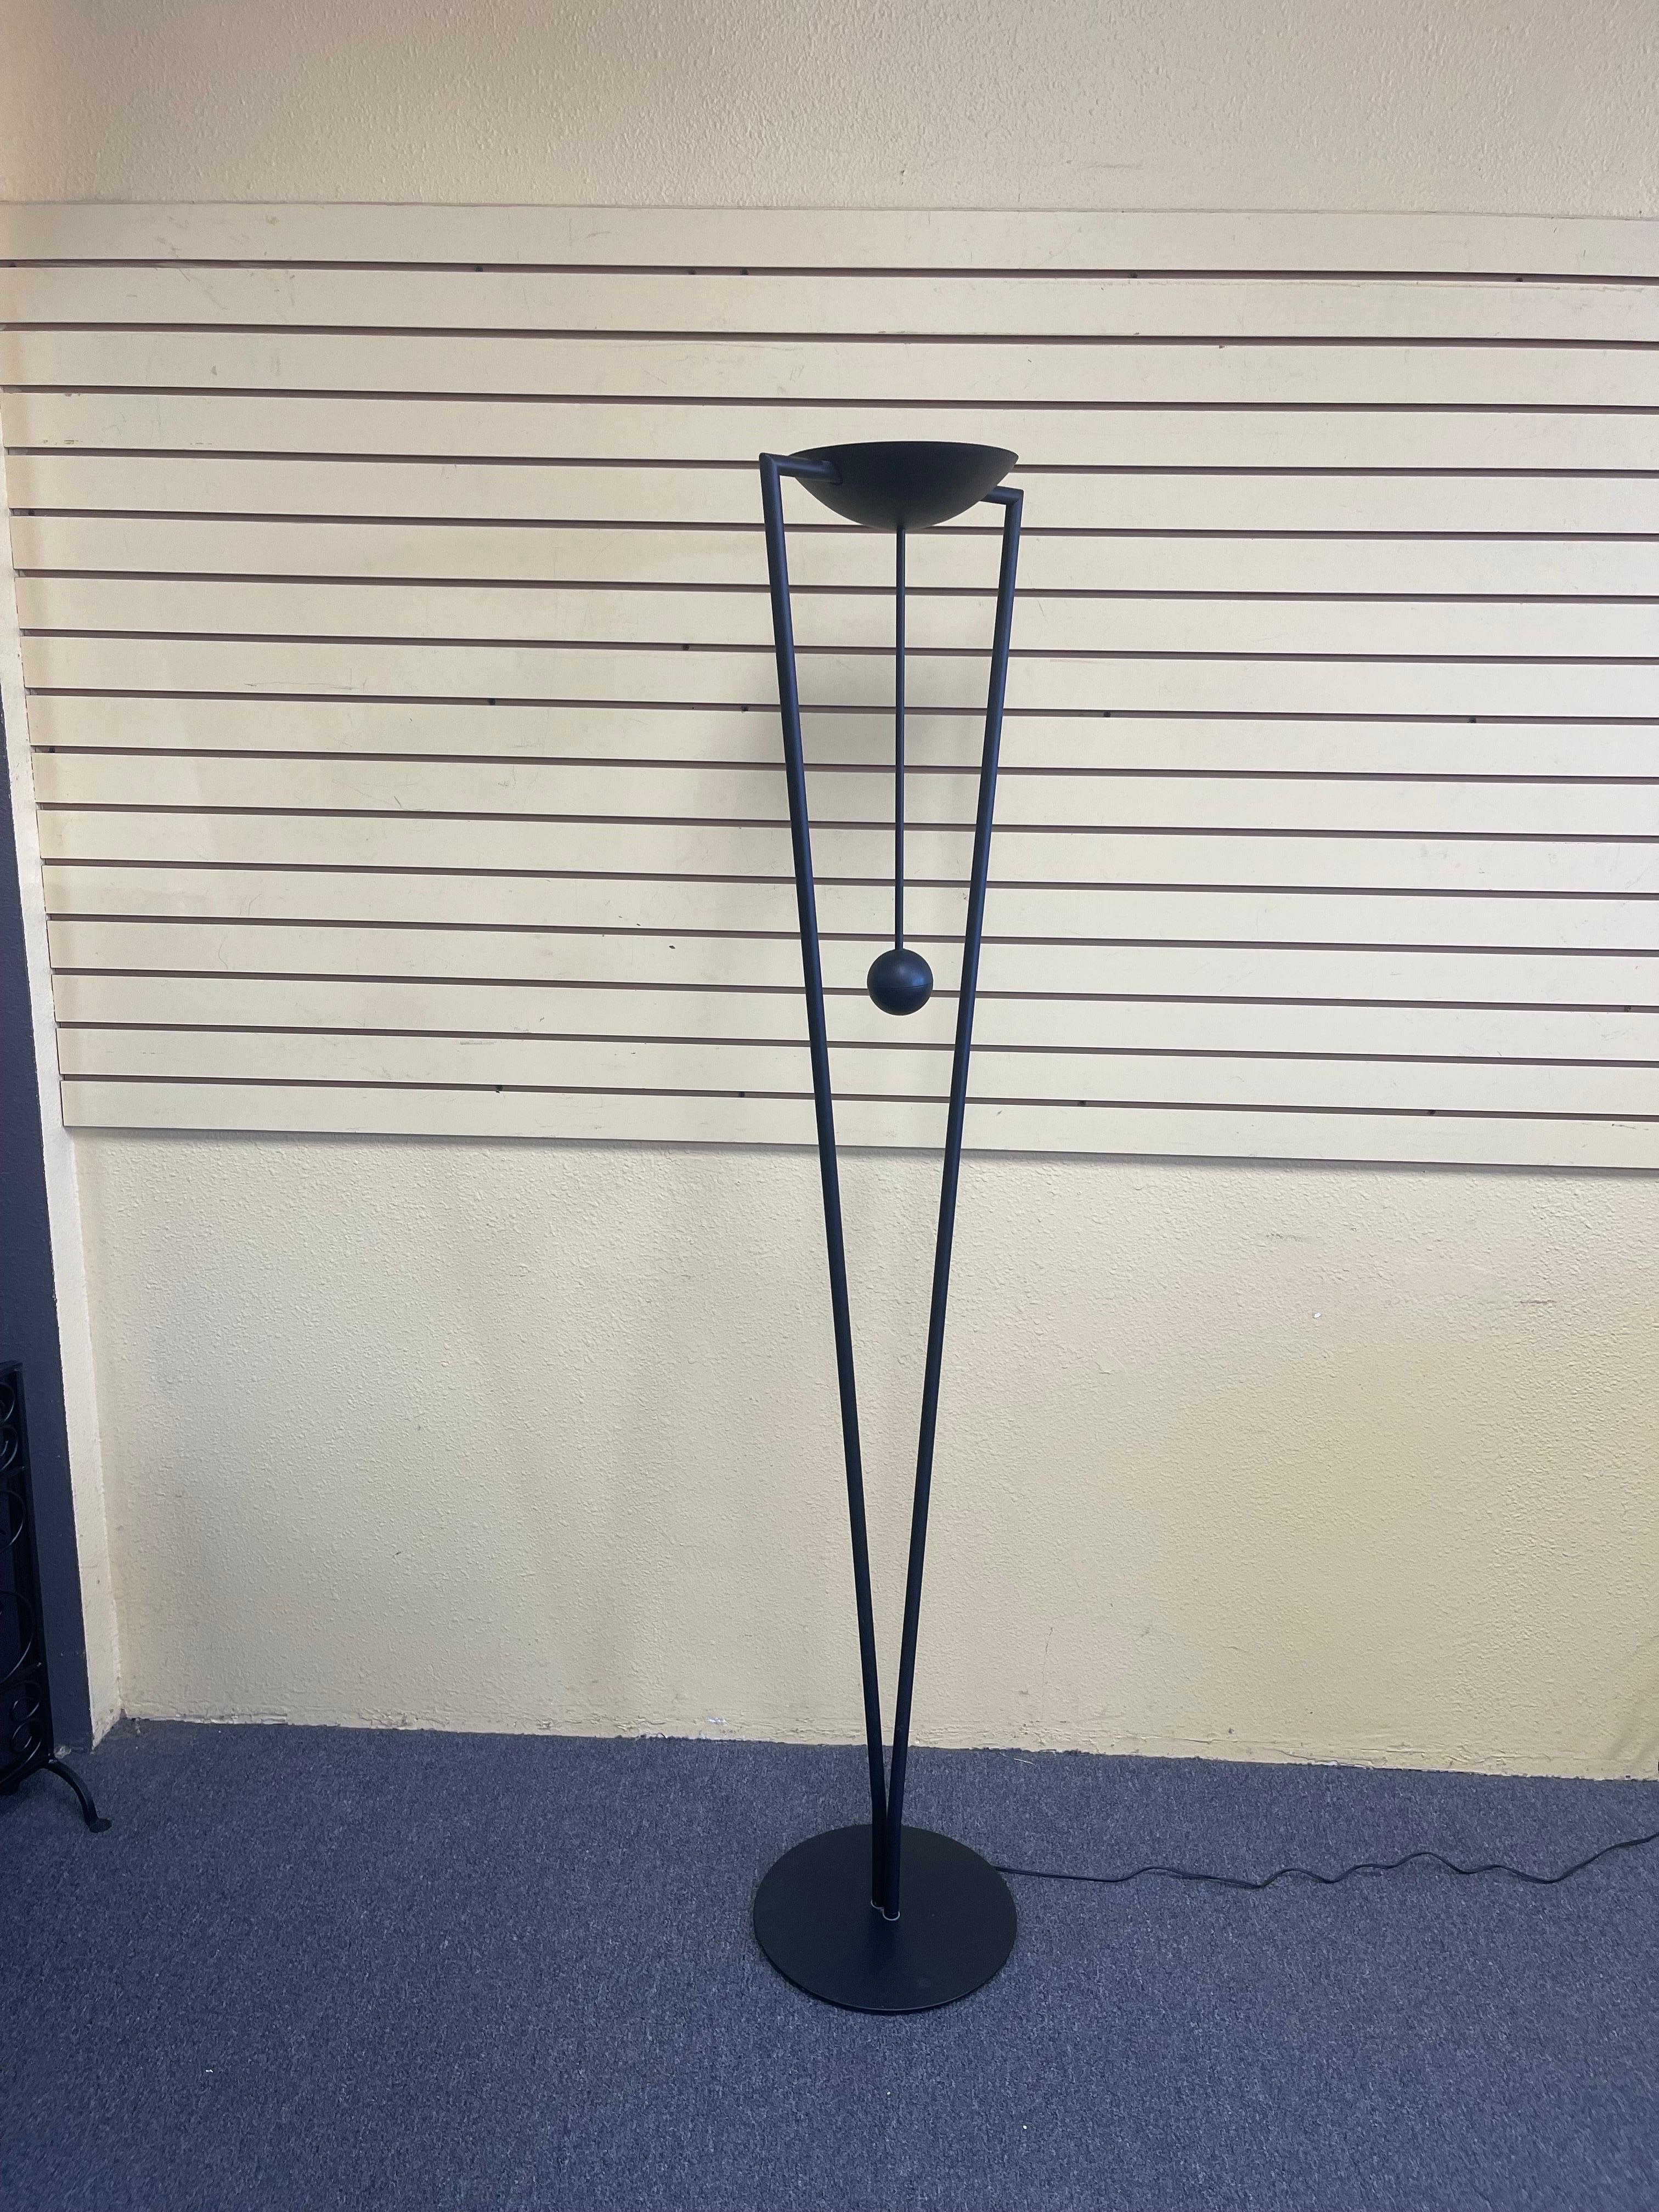 20th Century Post-Modern Sculptural Multi-Directional Floor Lamp / Torchiere by Ron Rezek For Sale